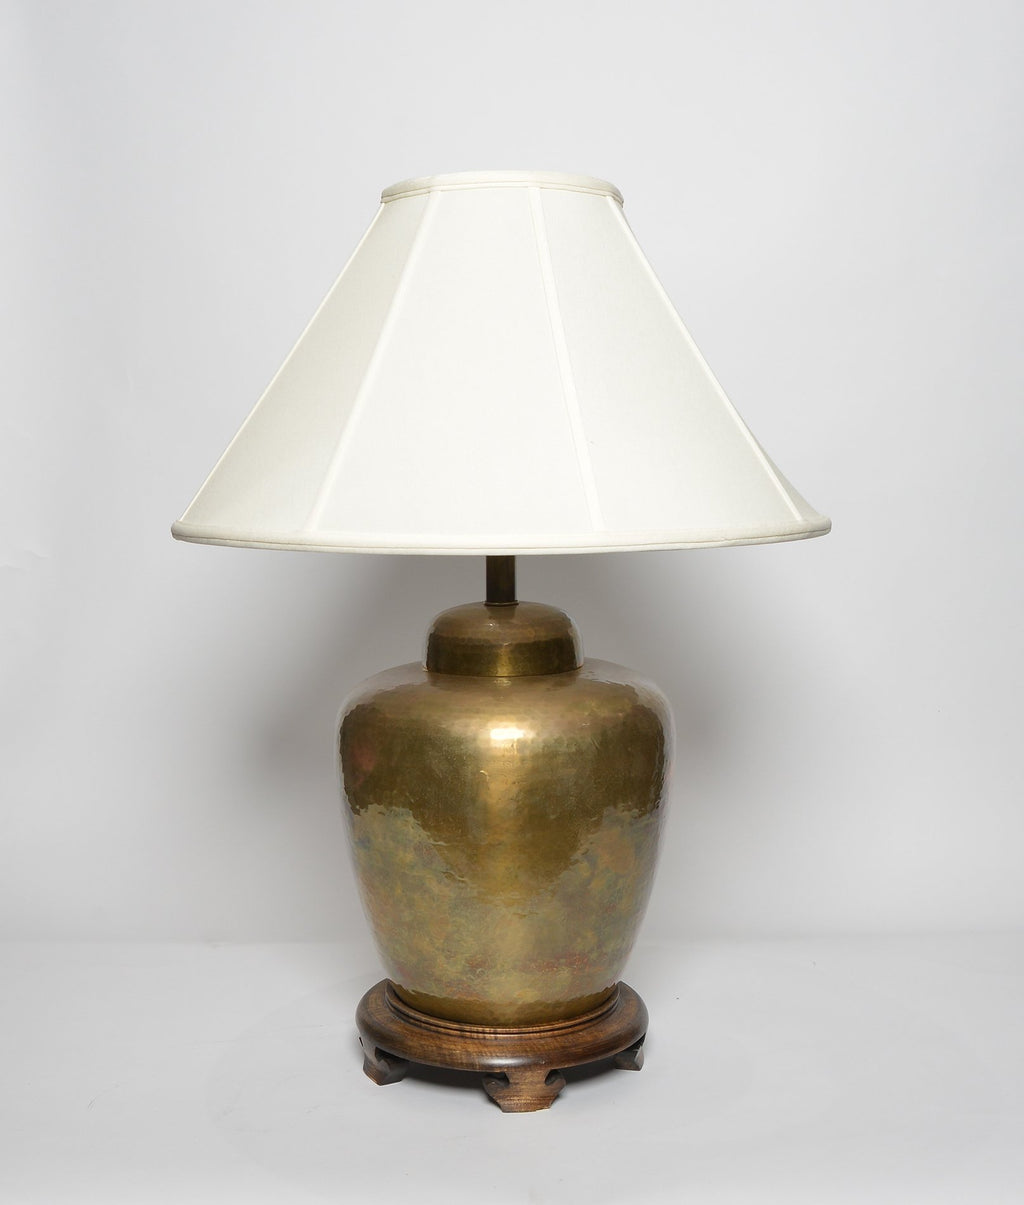 Hammered Brass Jar Table Lamp with Wooden Base